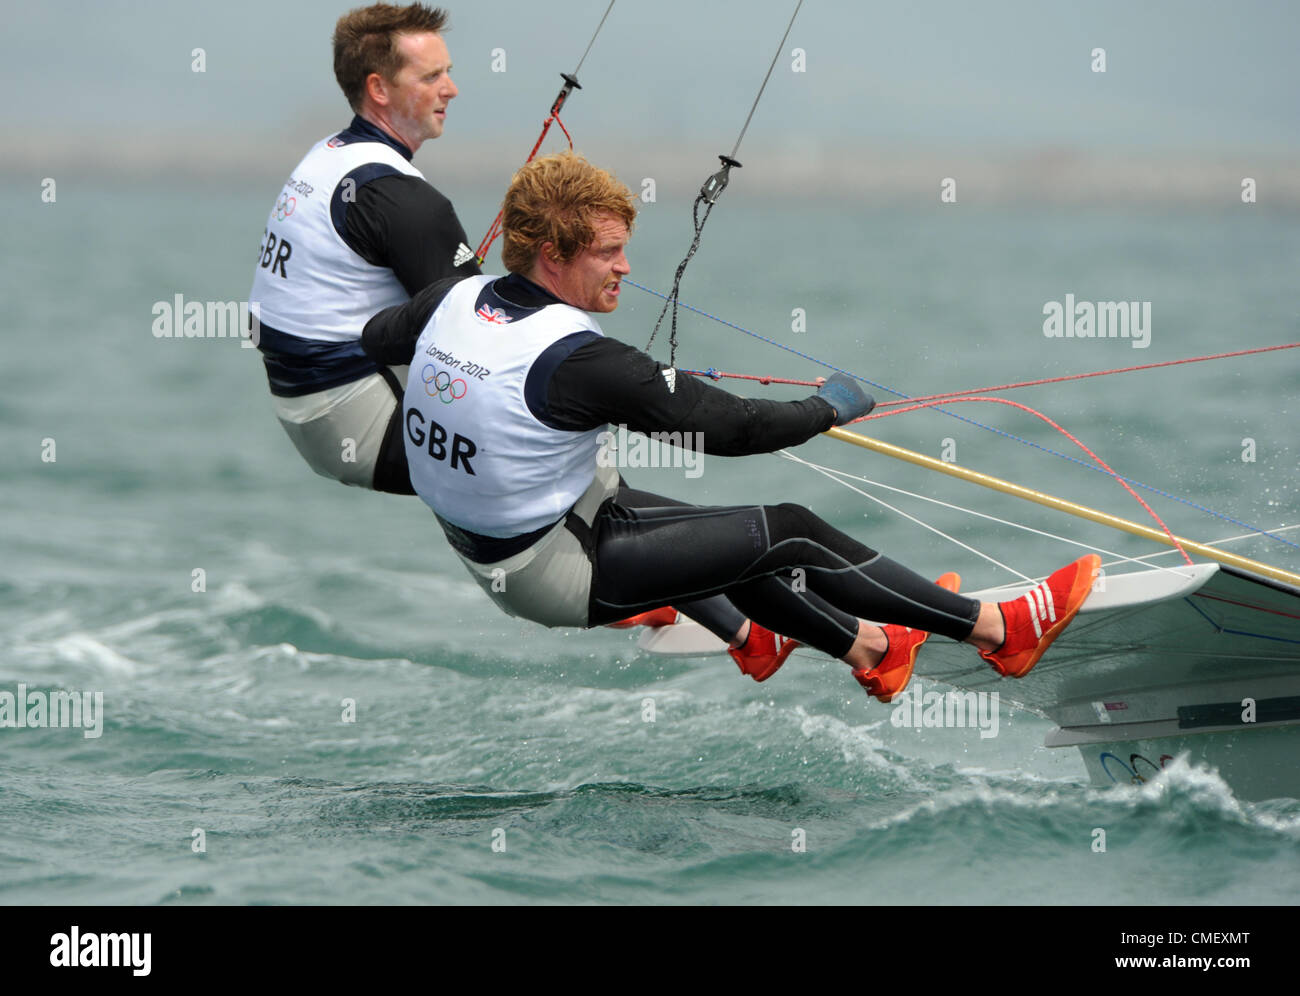 London 2012 Olympics: Sailing, action during the London 2012 Olympic Games at the Weymouth & Portland Venue, Dorset, Britain, UK. Stevie Morrison and Ben Rhodes of Great Britain in the 49er race July 31st, 2012 PICTURE BY: DORSET MEDIA SERVICE Stock Photo